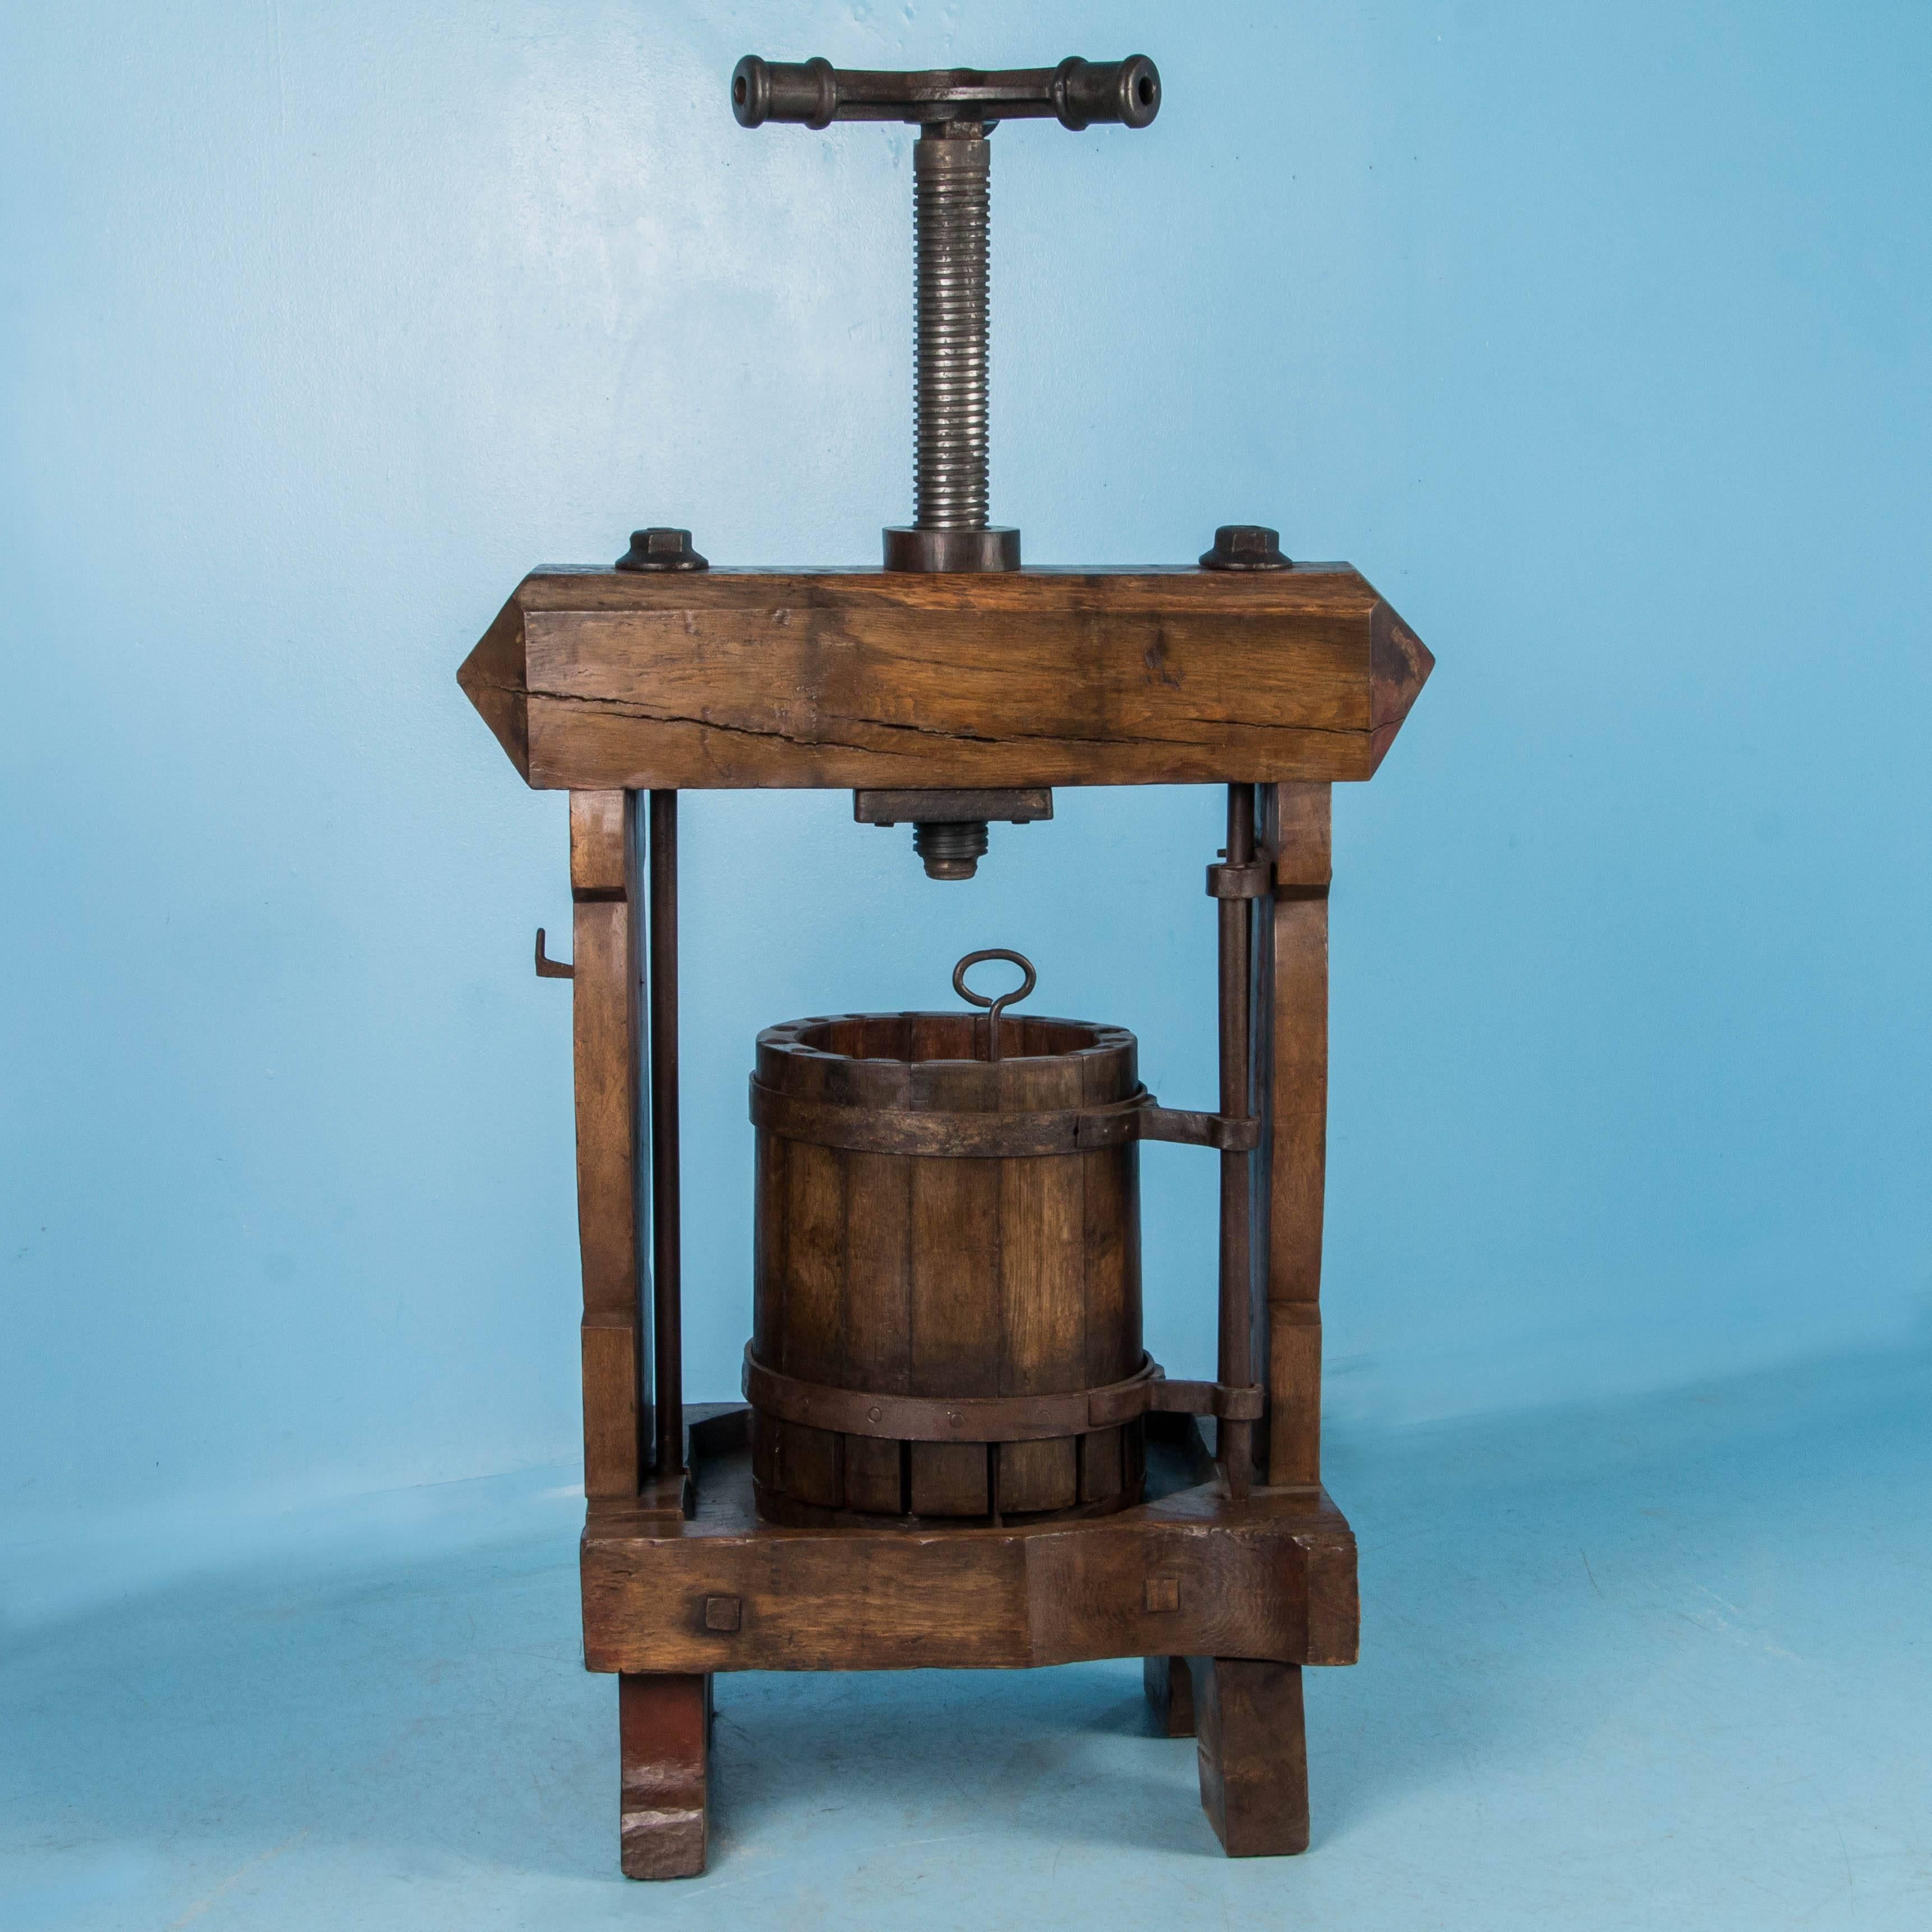 This wine press is a rare find, handcrafted from solid oak, circa 1900. The heavy gauge of the hand-thread iron shows dramatically against the oak, creating a very strong visual appeal. This will be an exceptional addition to any wine cellar, winery